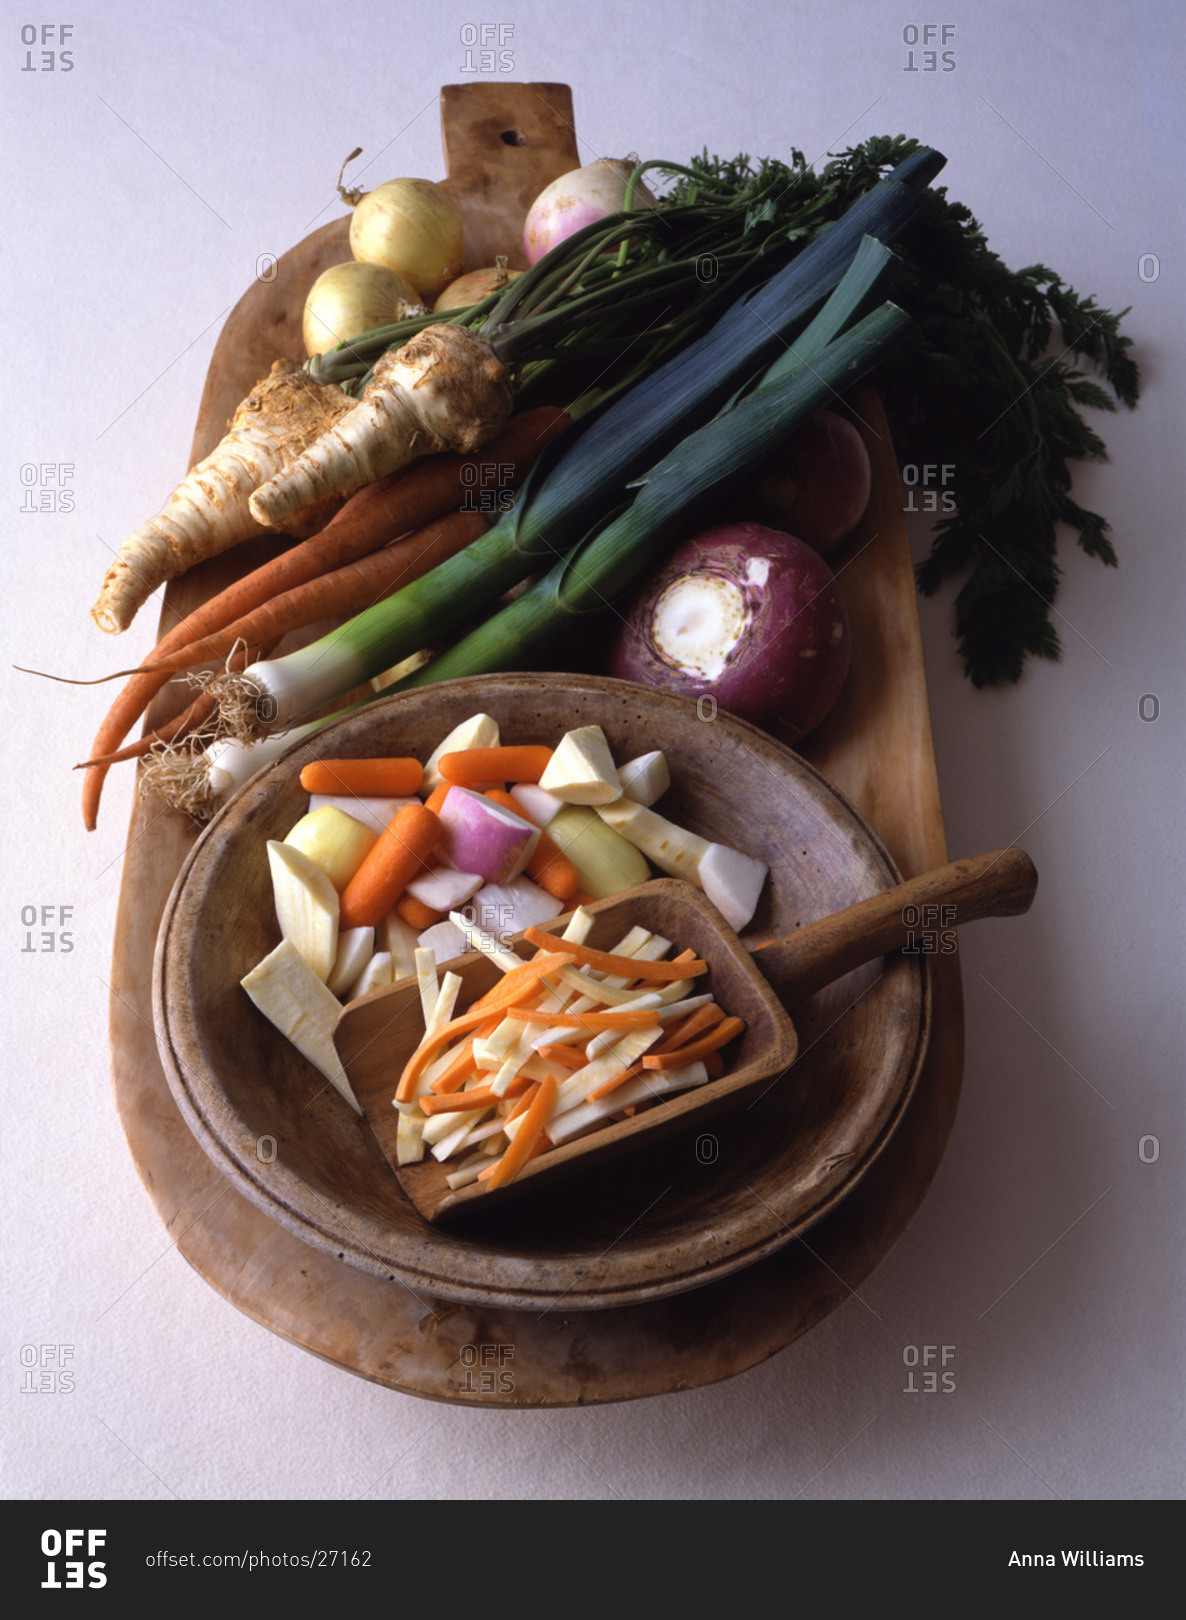 Root vegetables whole and cut up: carrots, onions, turnips, radishes, and scallions